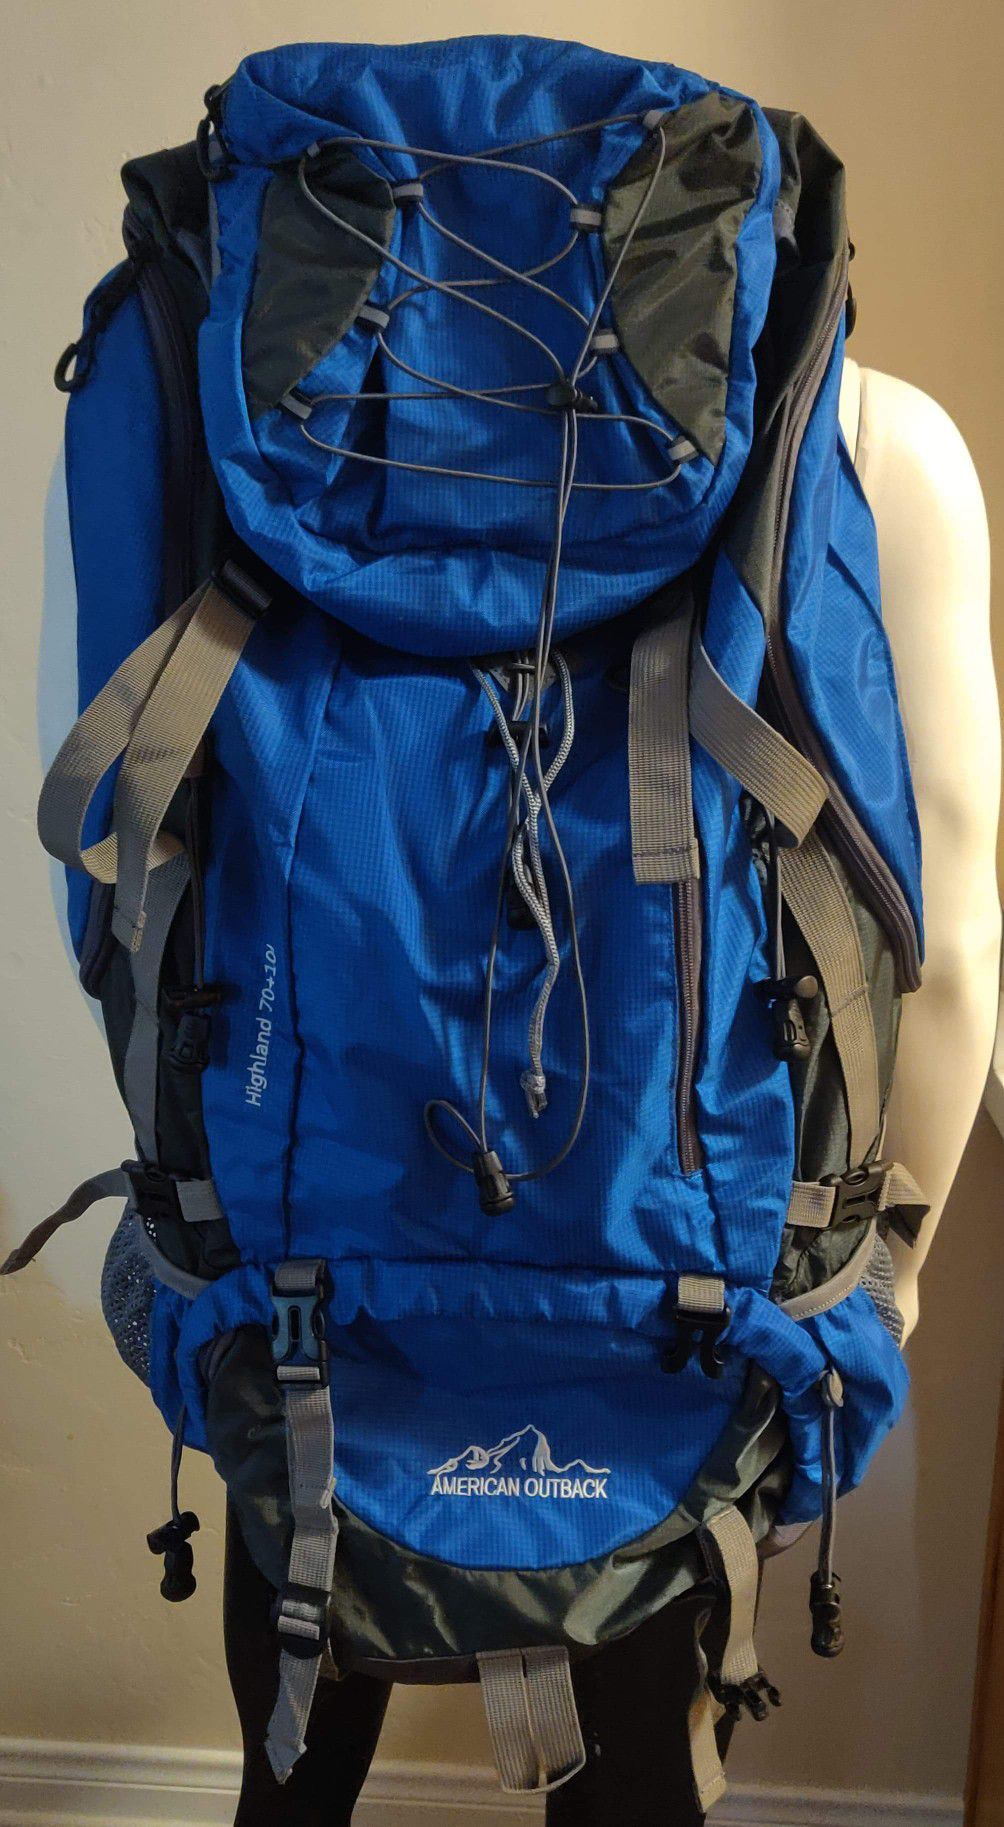 Outdoor backpack new